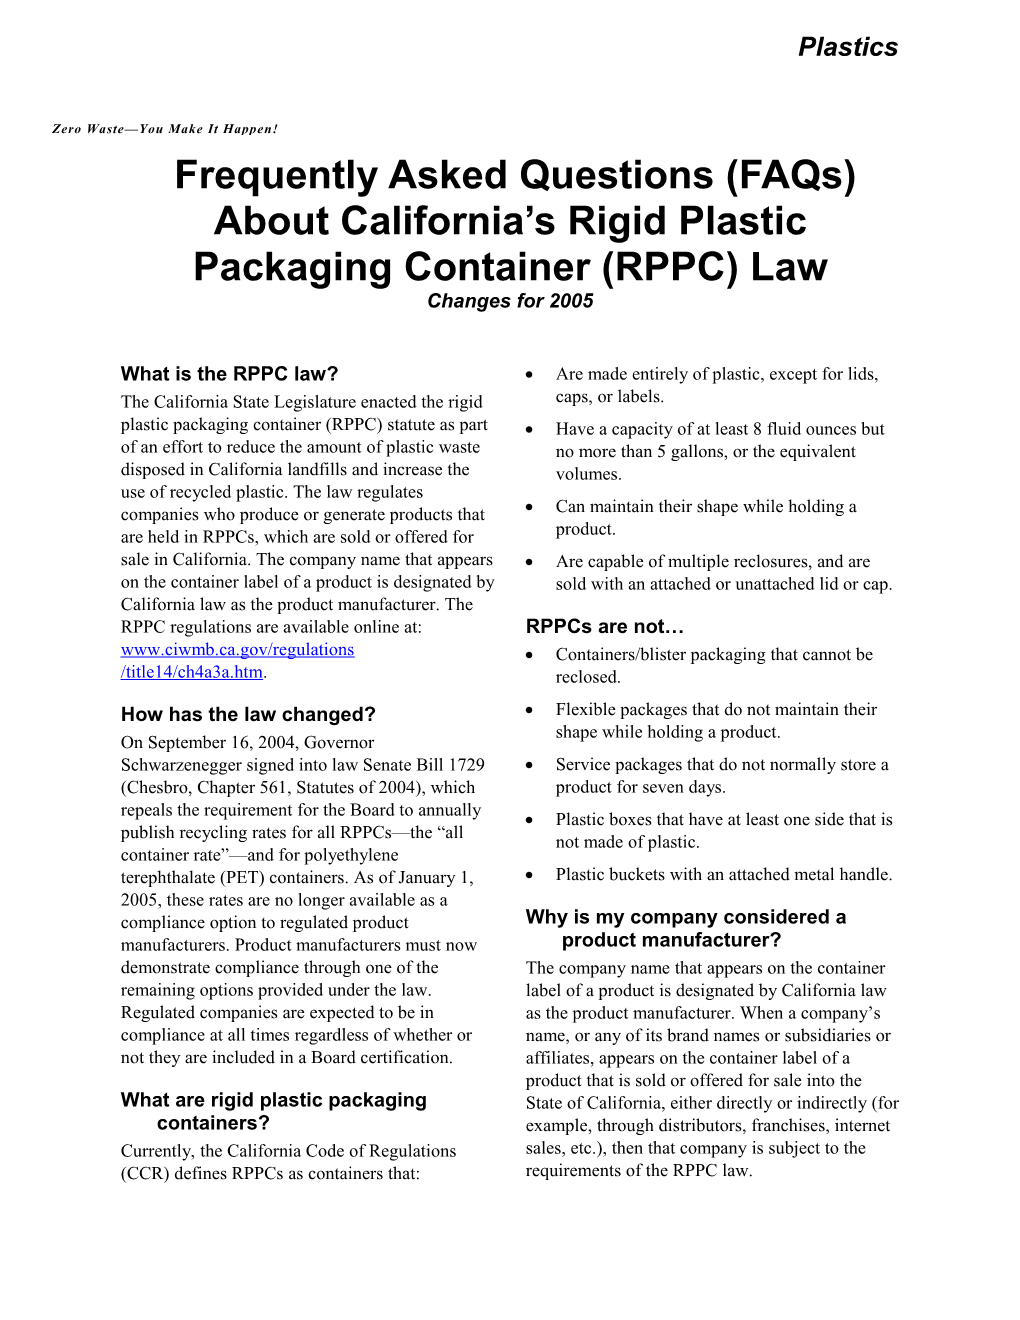 Frequently Asked Questions (Faqs) About California S Rigid Plastic Packaging Container